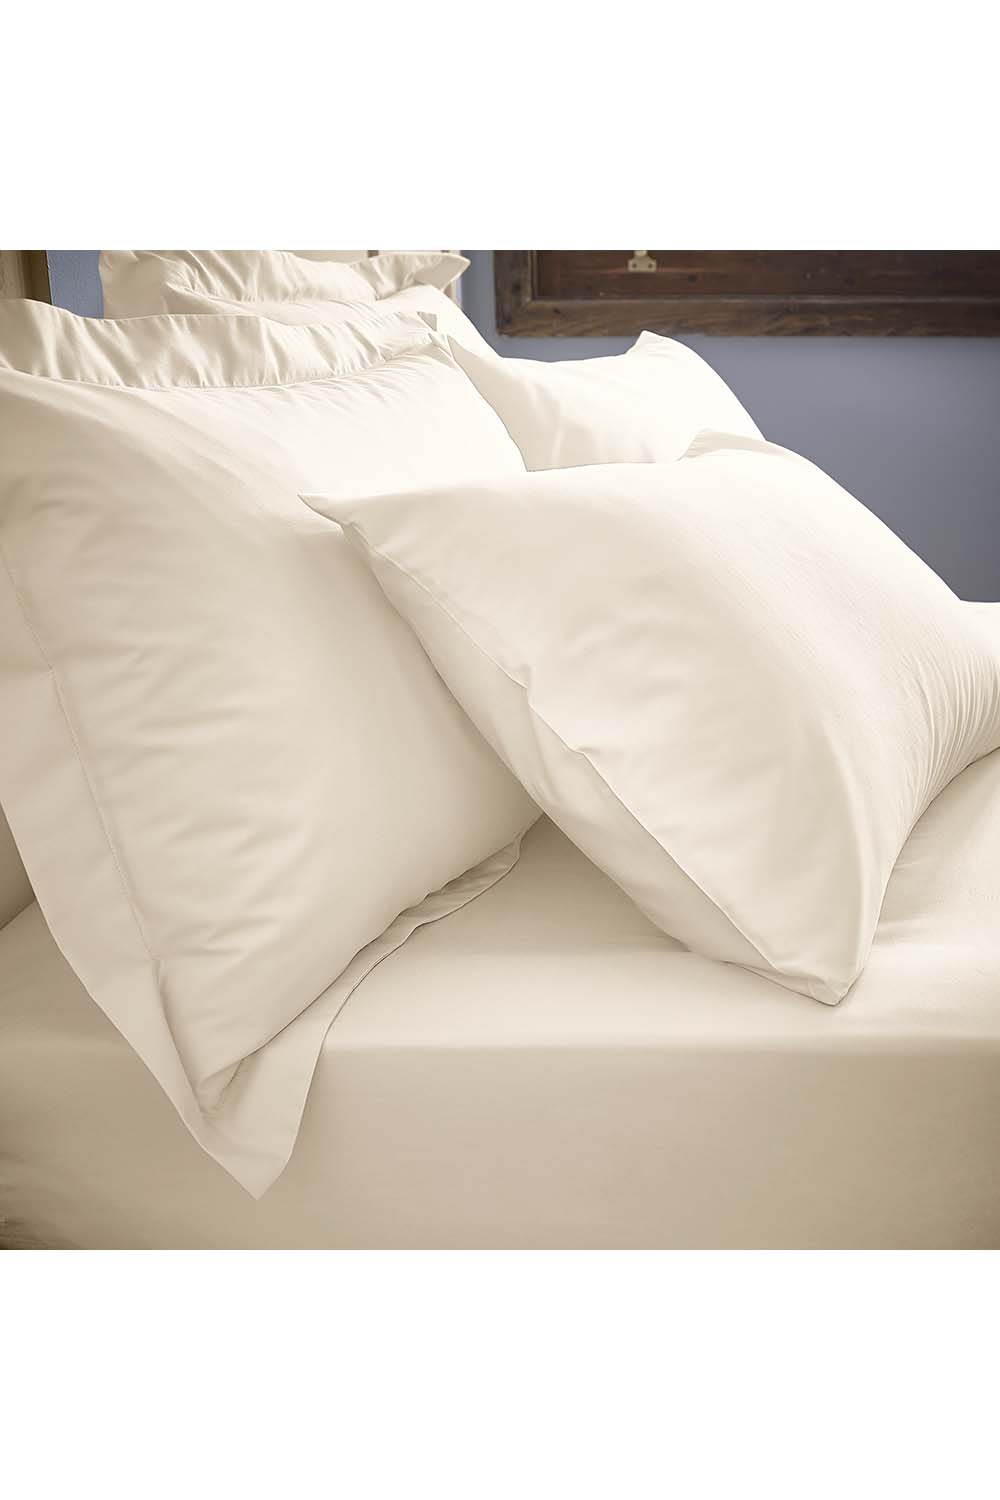 The Home Luxury Collection 200 Thread Count Deep Fitted Sheet- Cream 1 Shaws Department Stores